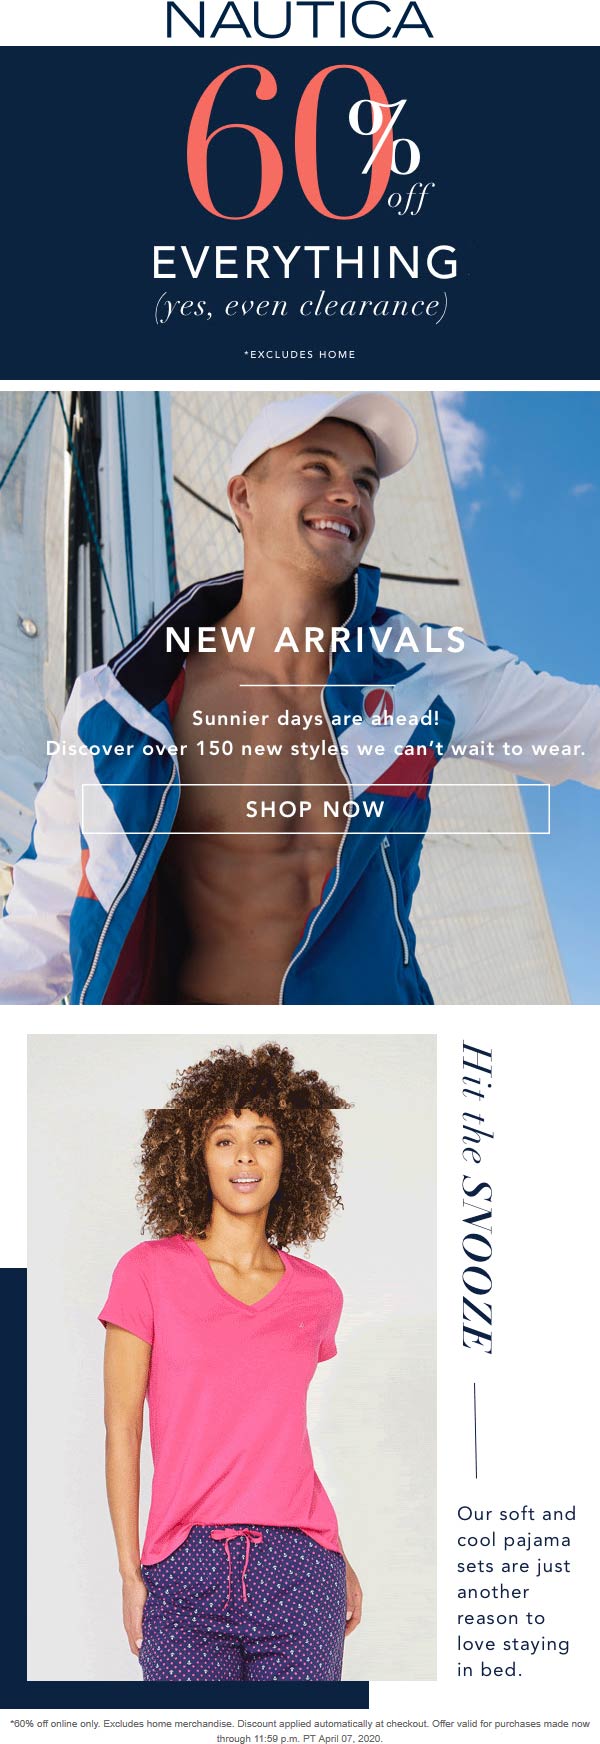 Nautica coupons & promo code for [May 2022]